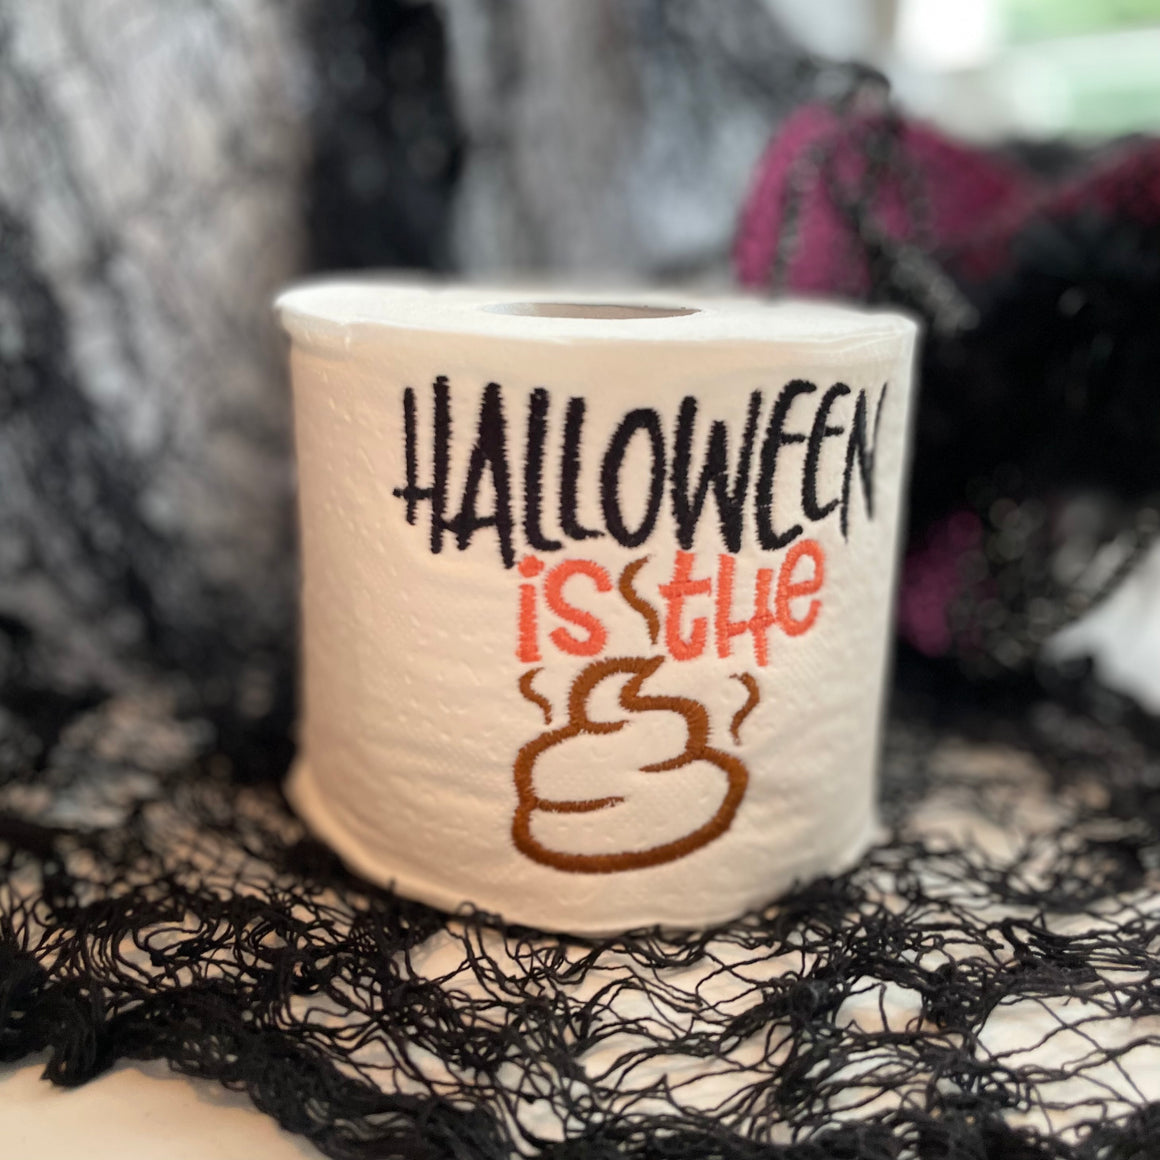 "Halloween is the !" Funny Gag Gift Toilet Paper